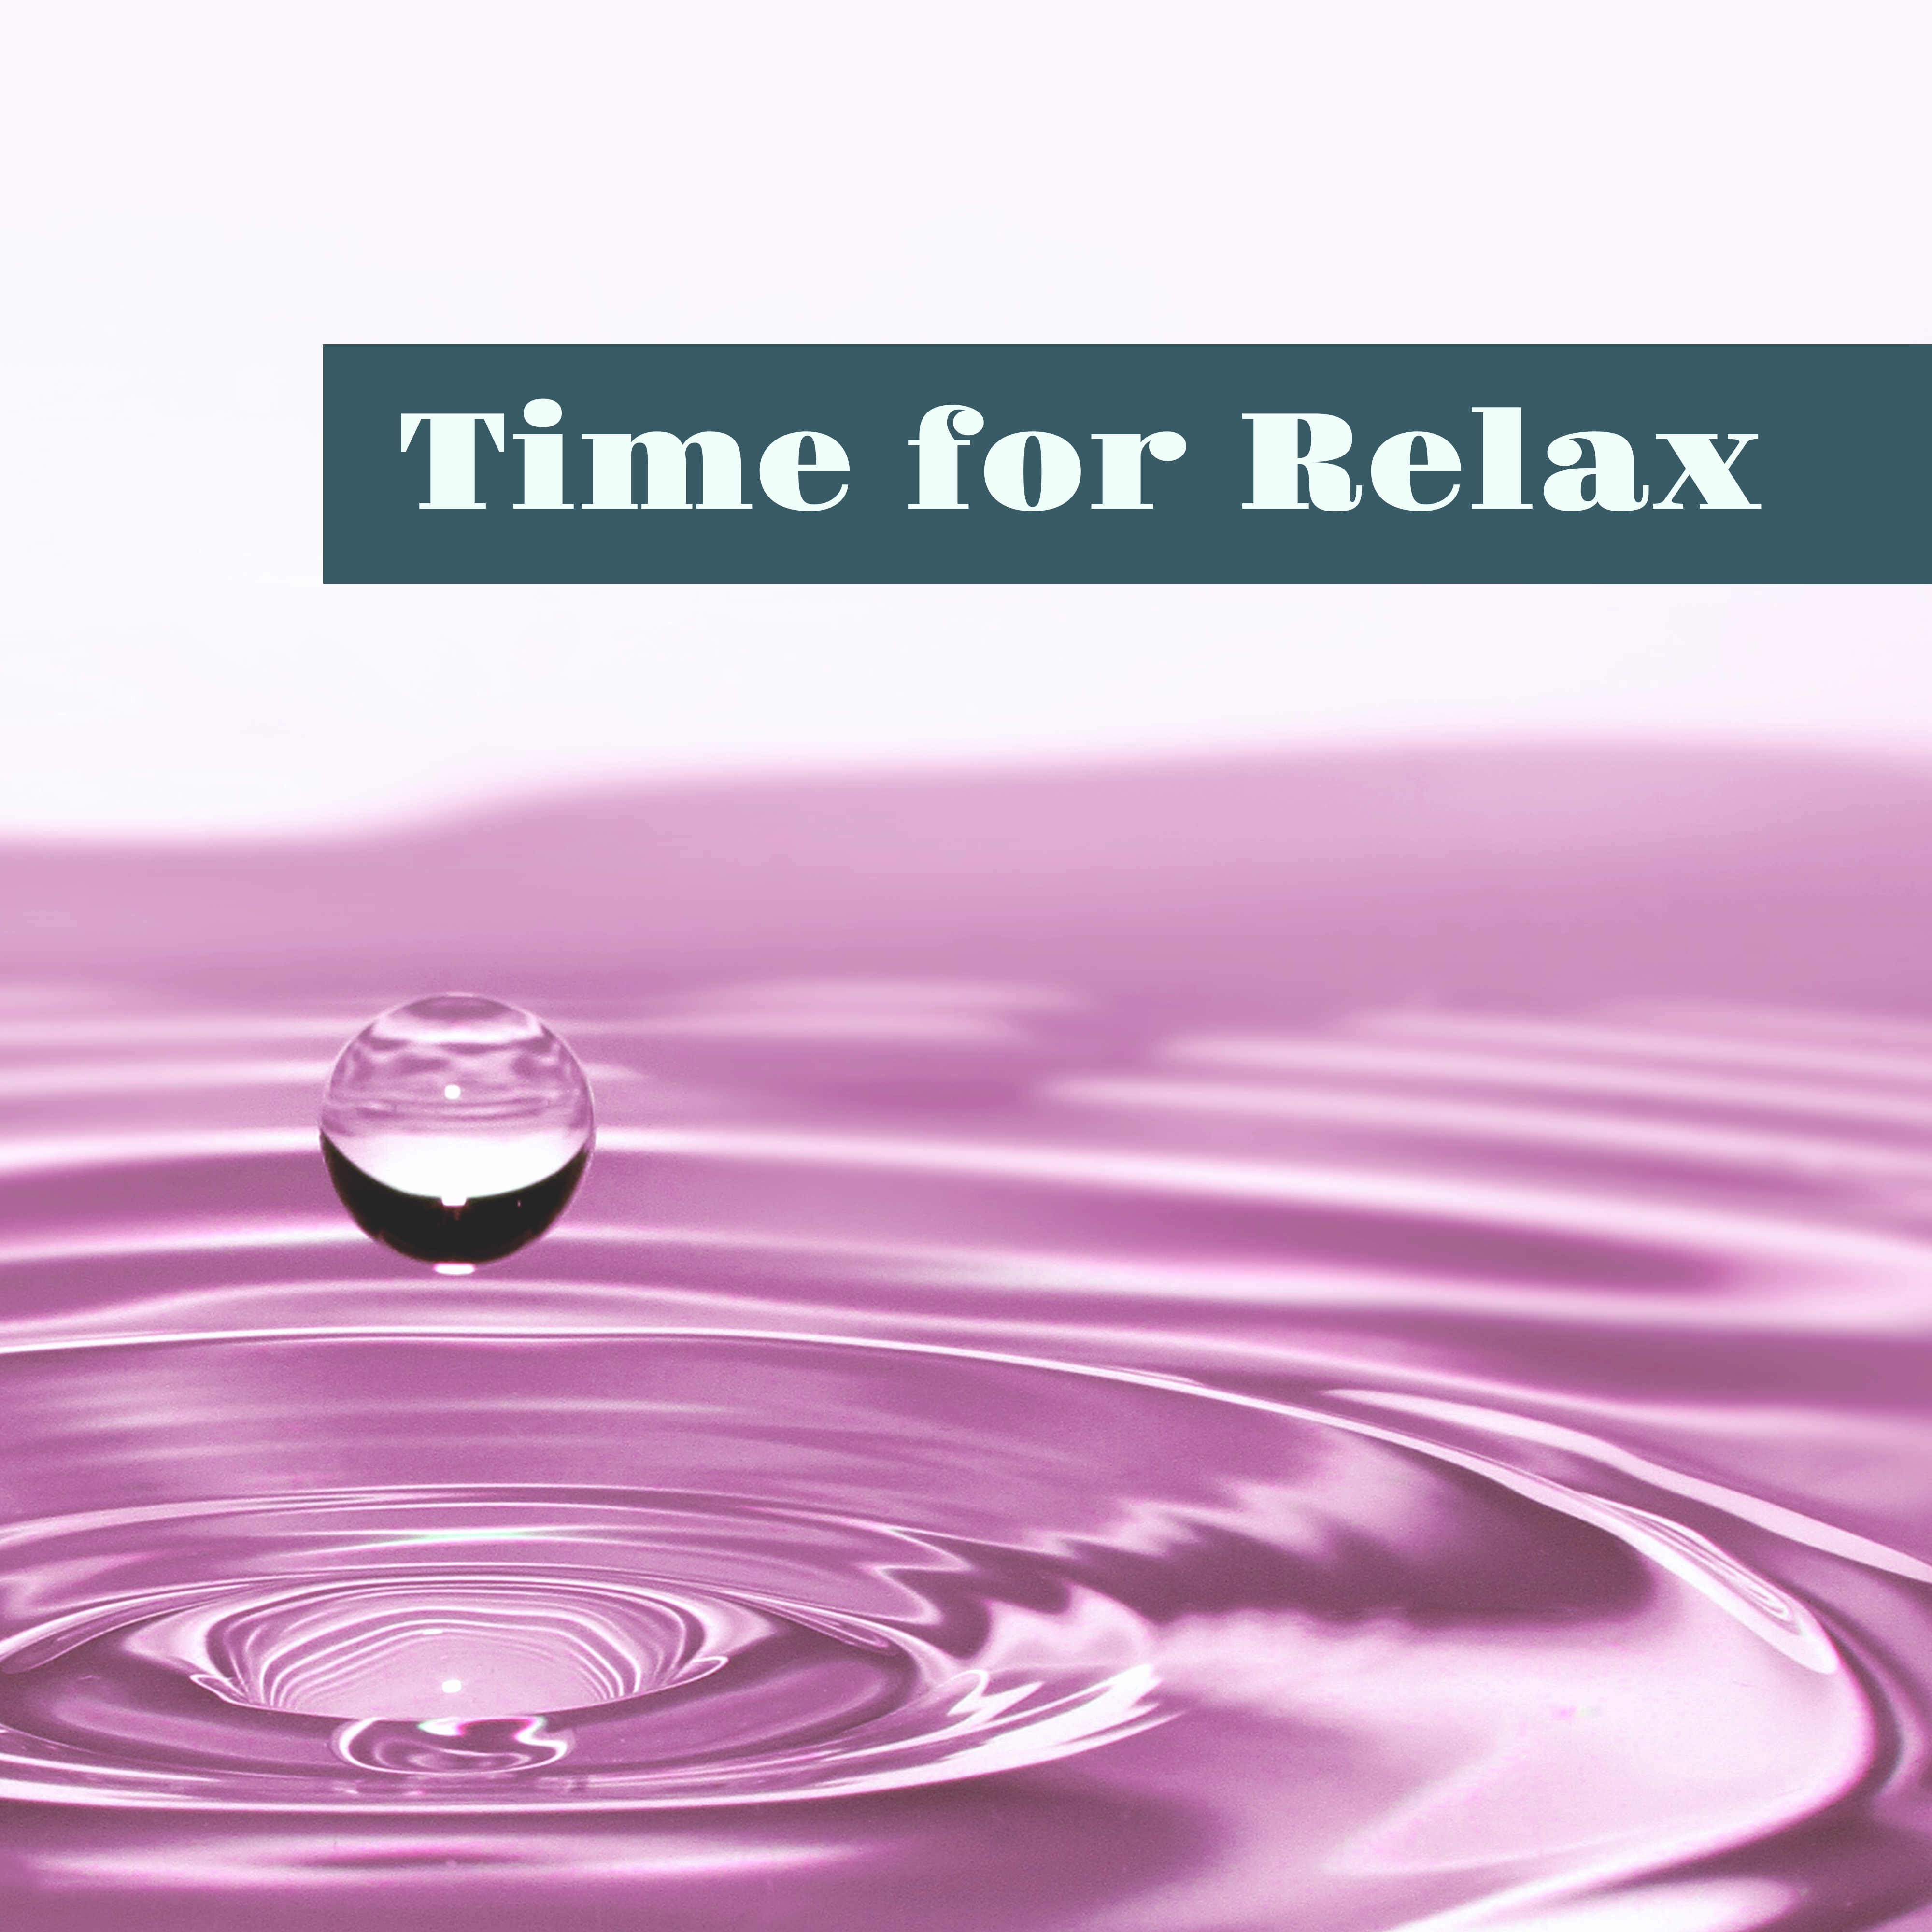 Time for Relax  Calming Sounds of Nature Help You Feel Better, Relaxing Music, Full Rest